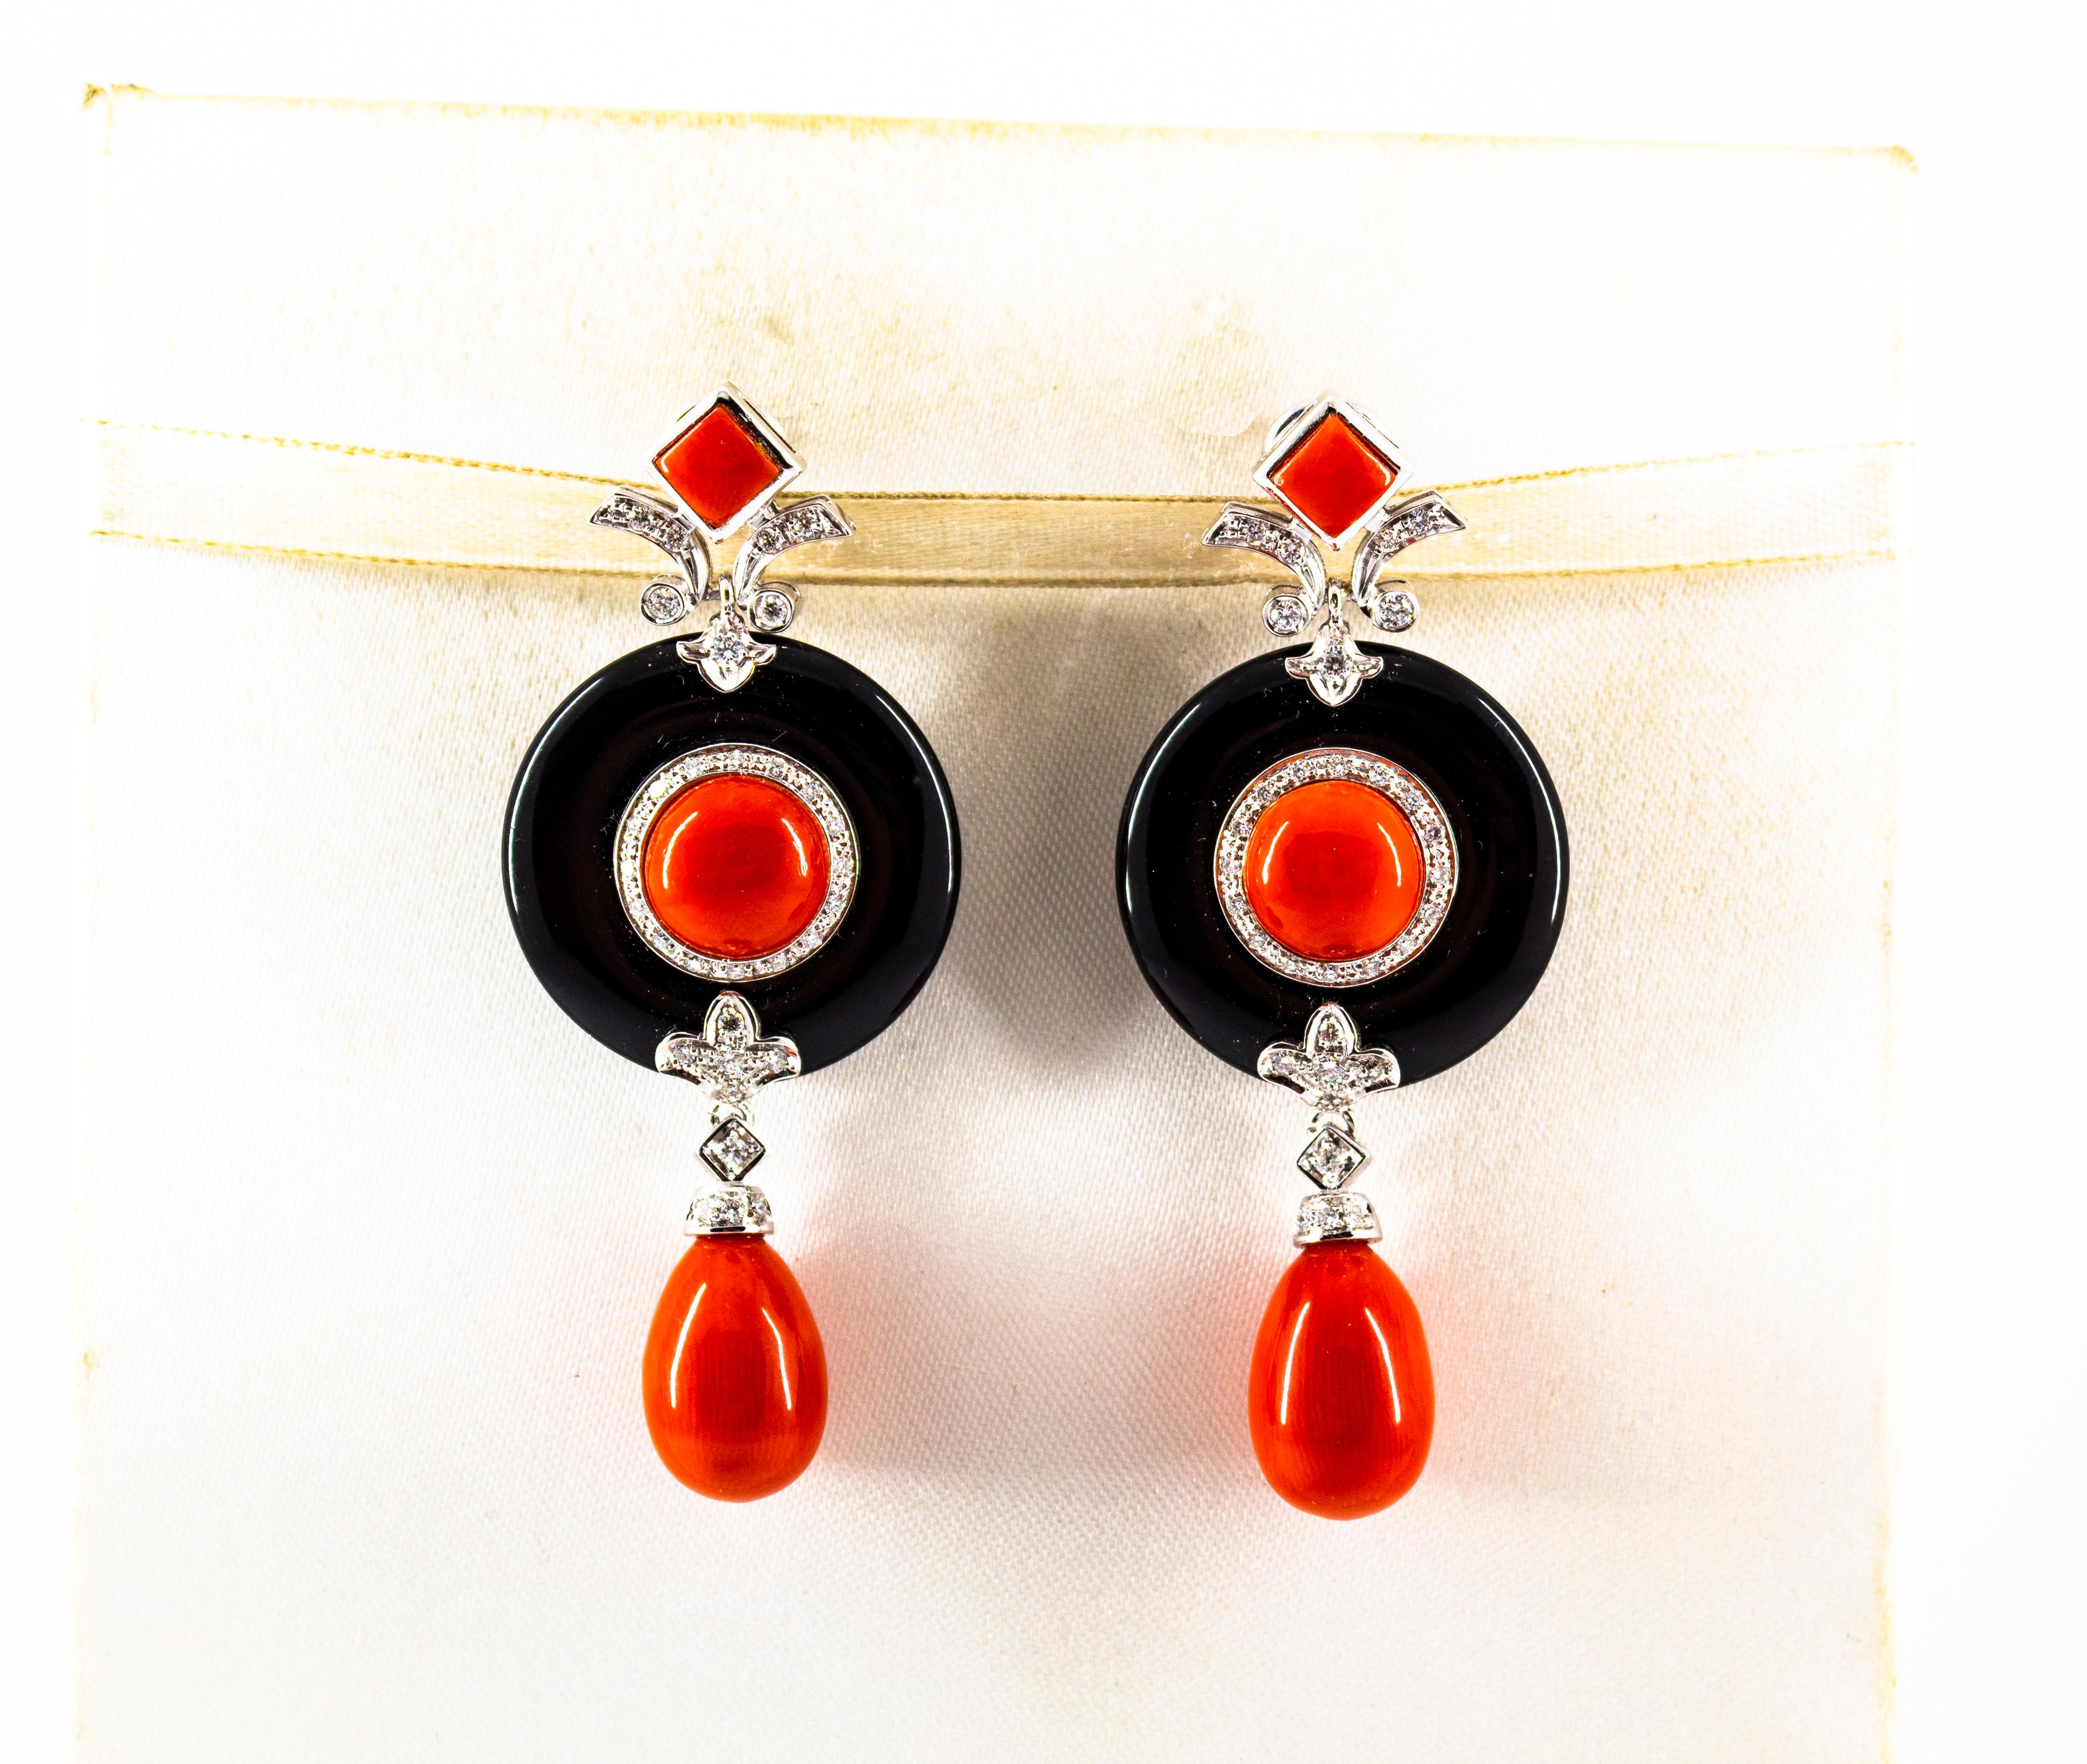 Brilliant Cut Mediterranean Red Coral 0.95 Carat White Diamond Onyx White Gold Drop Earrings For Sale